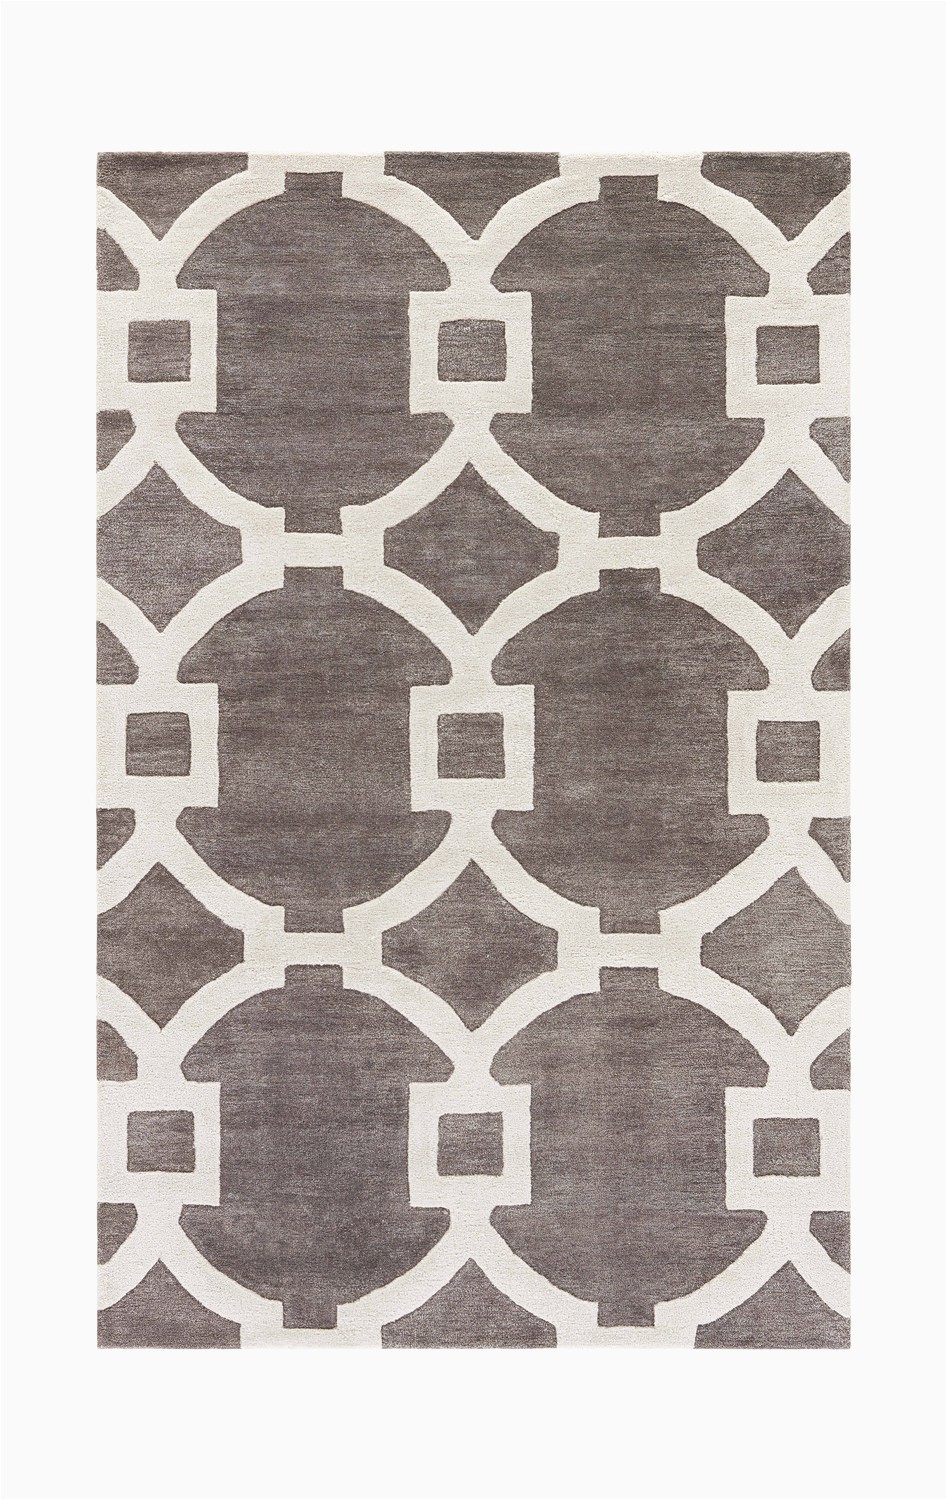 Grey and White area Rug 9×12 City Grey White area Rug